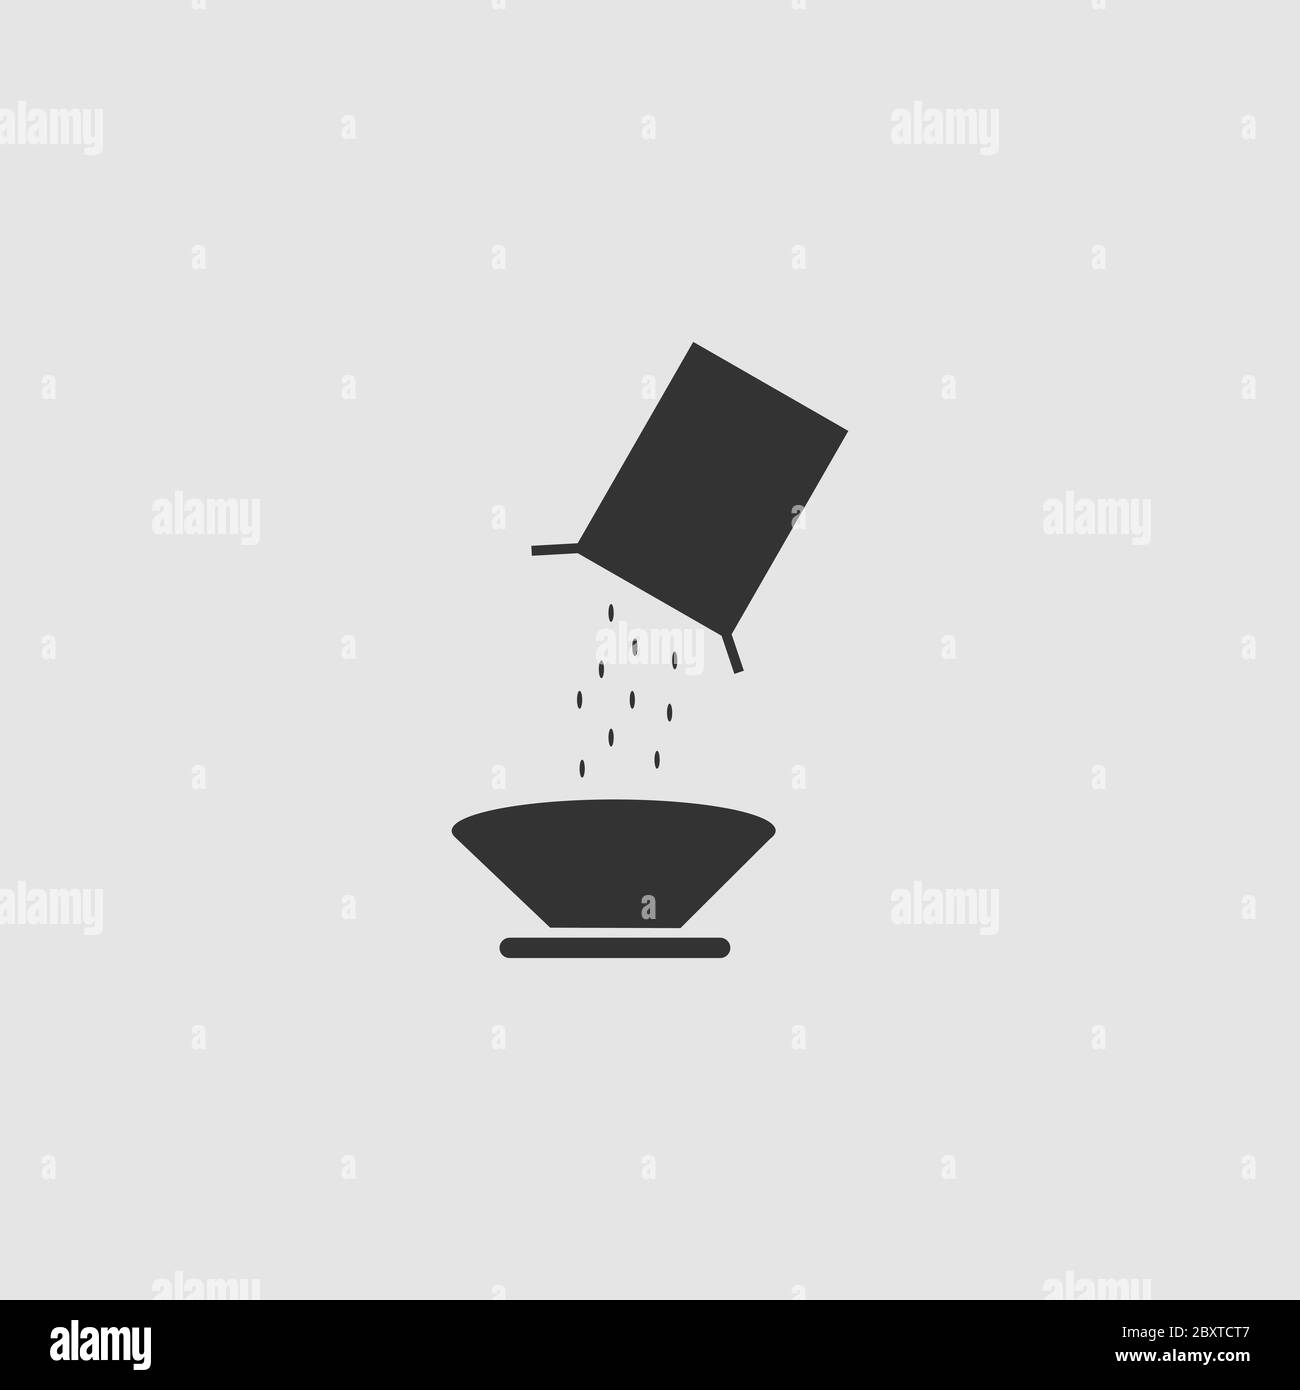 Cereal icon flat. Black pictogram on grey background. Vector illustration symbol Stock Vector